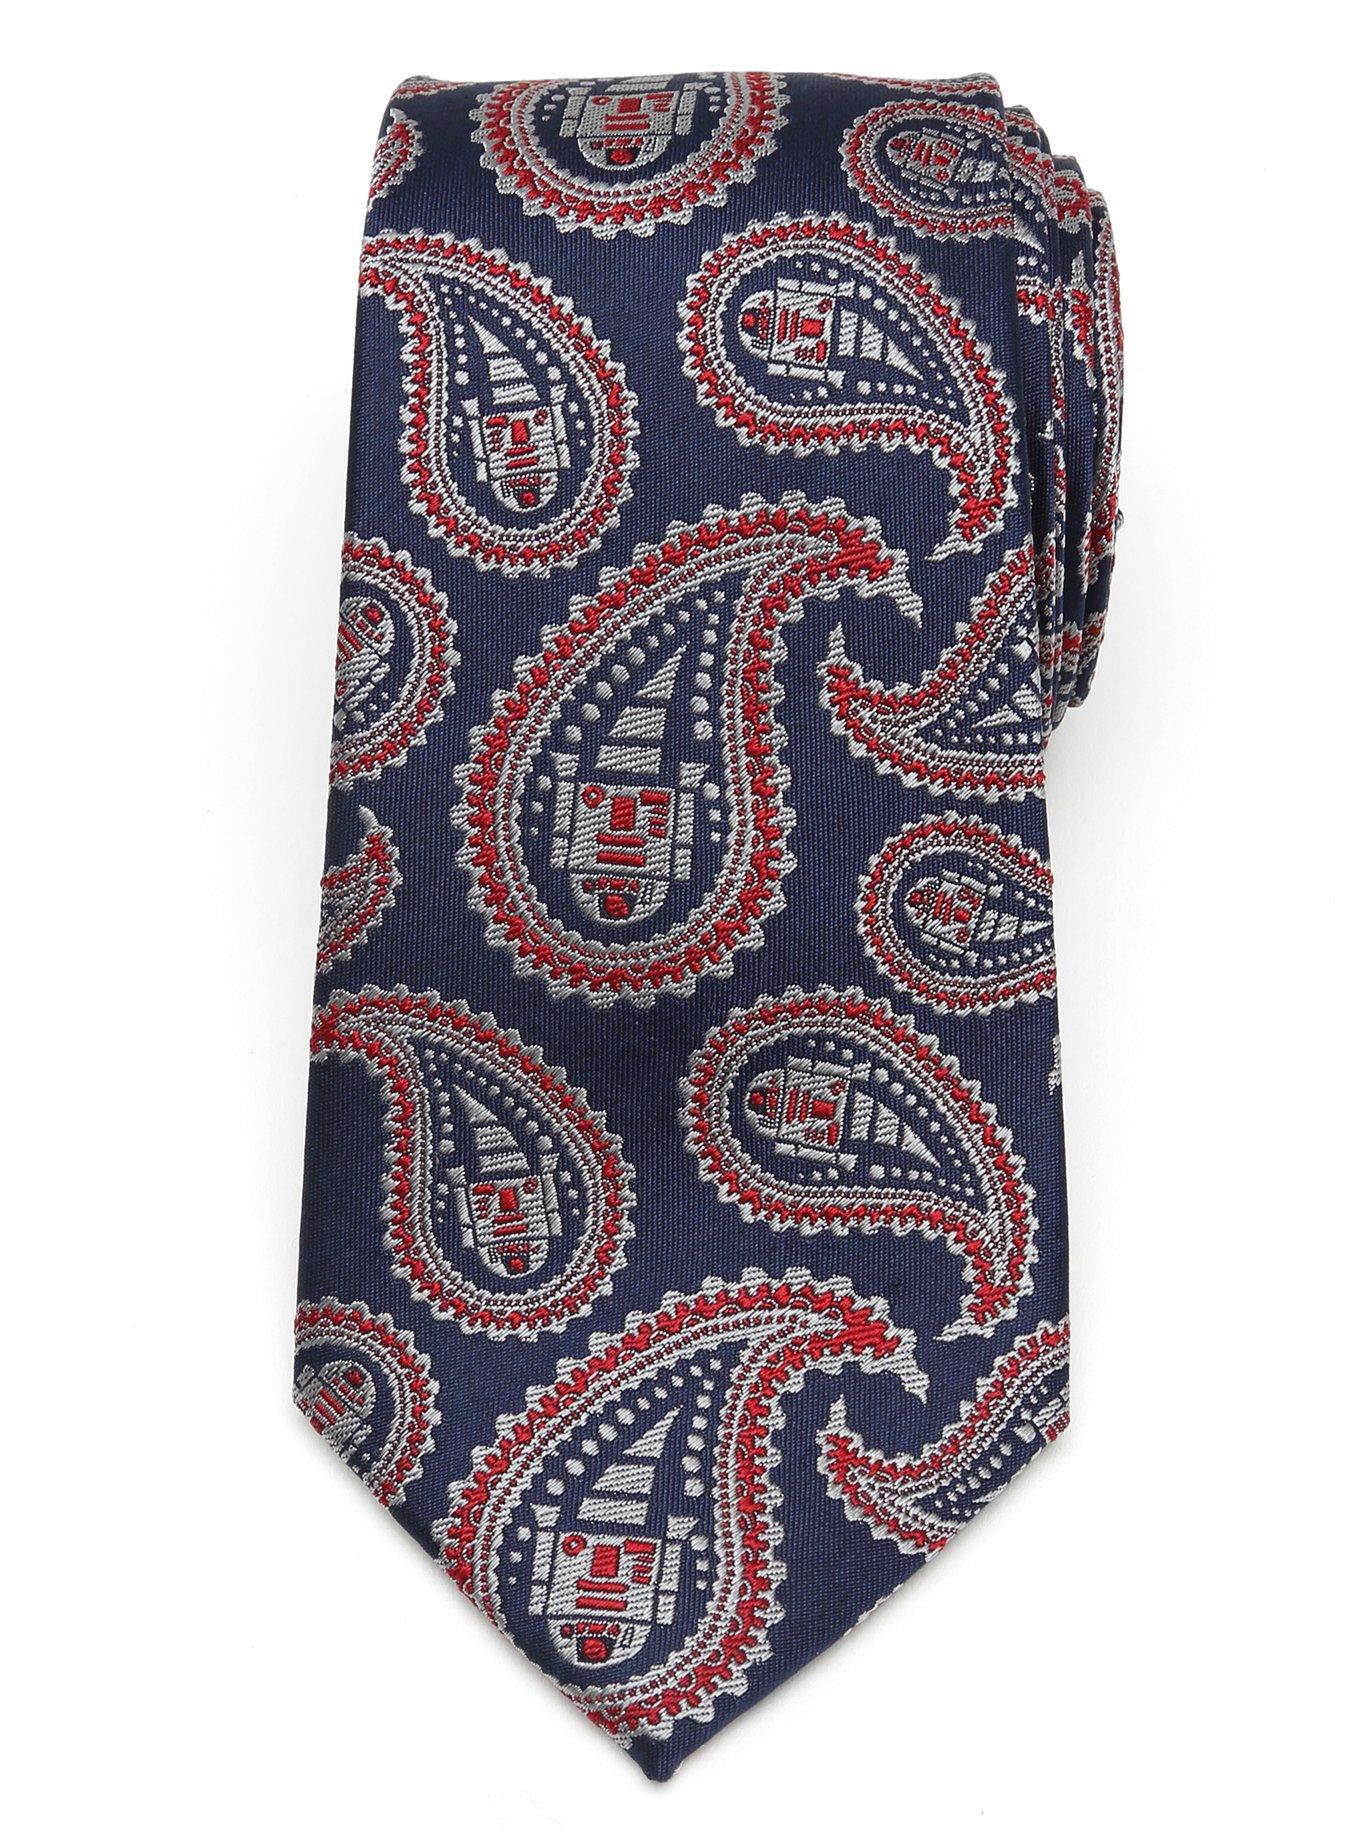 Star Wars R2D2 Blue and Red Paisley Tie | Hot Topic